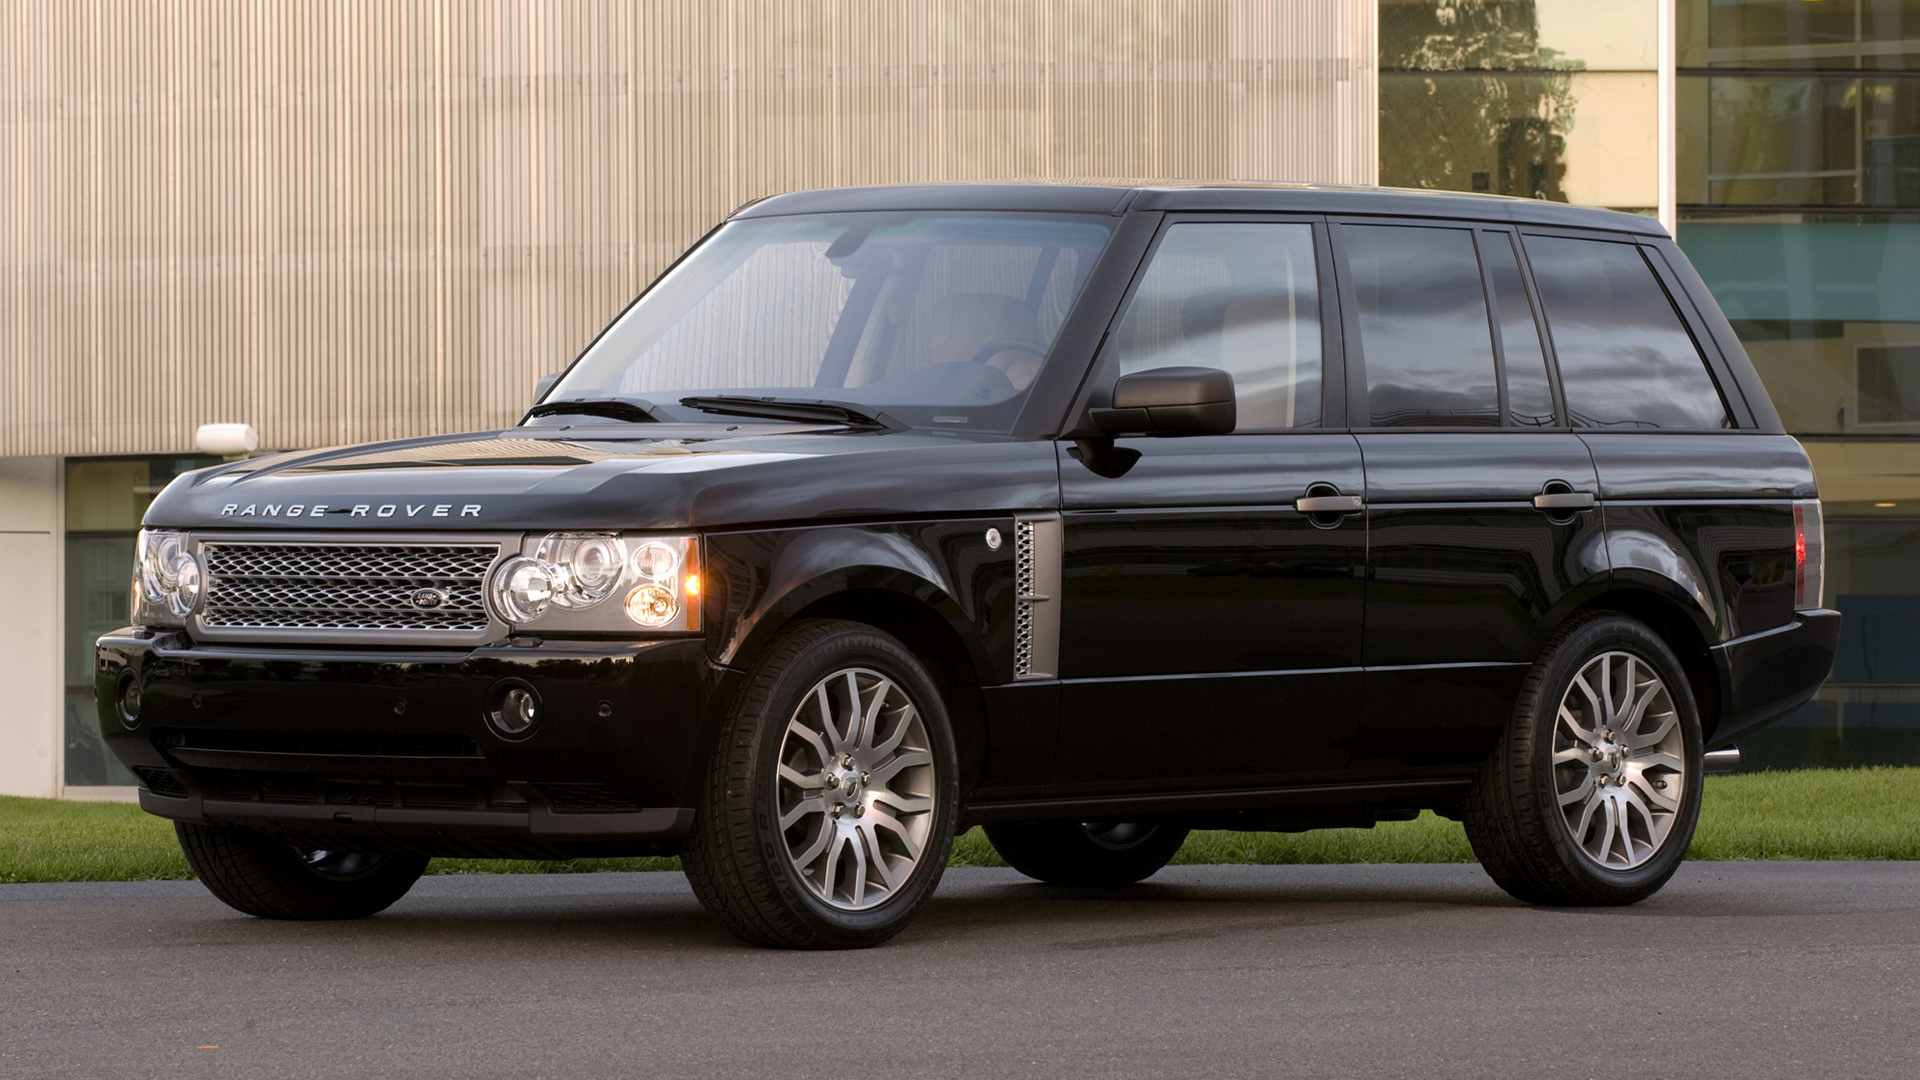 2008 Range Rover Autobiography (US) - Wallpapers and HD Images | Car Pixel